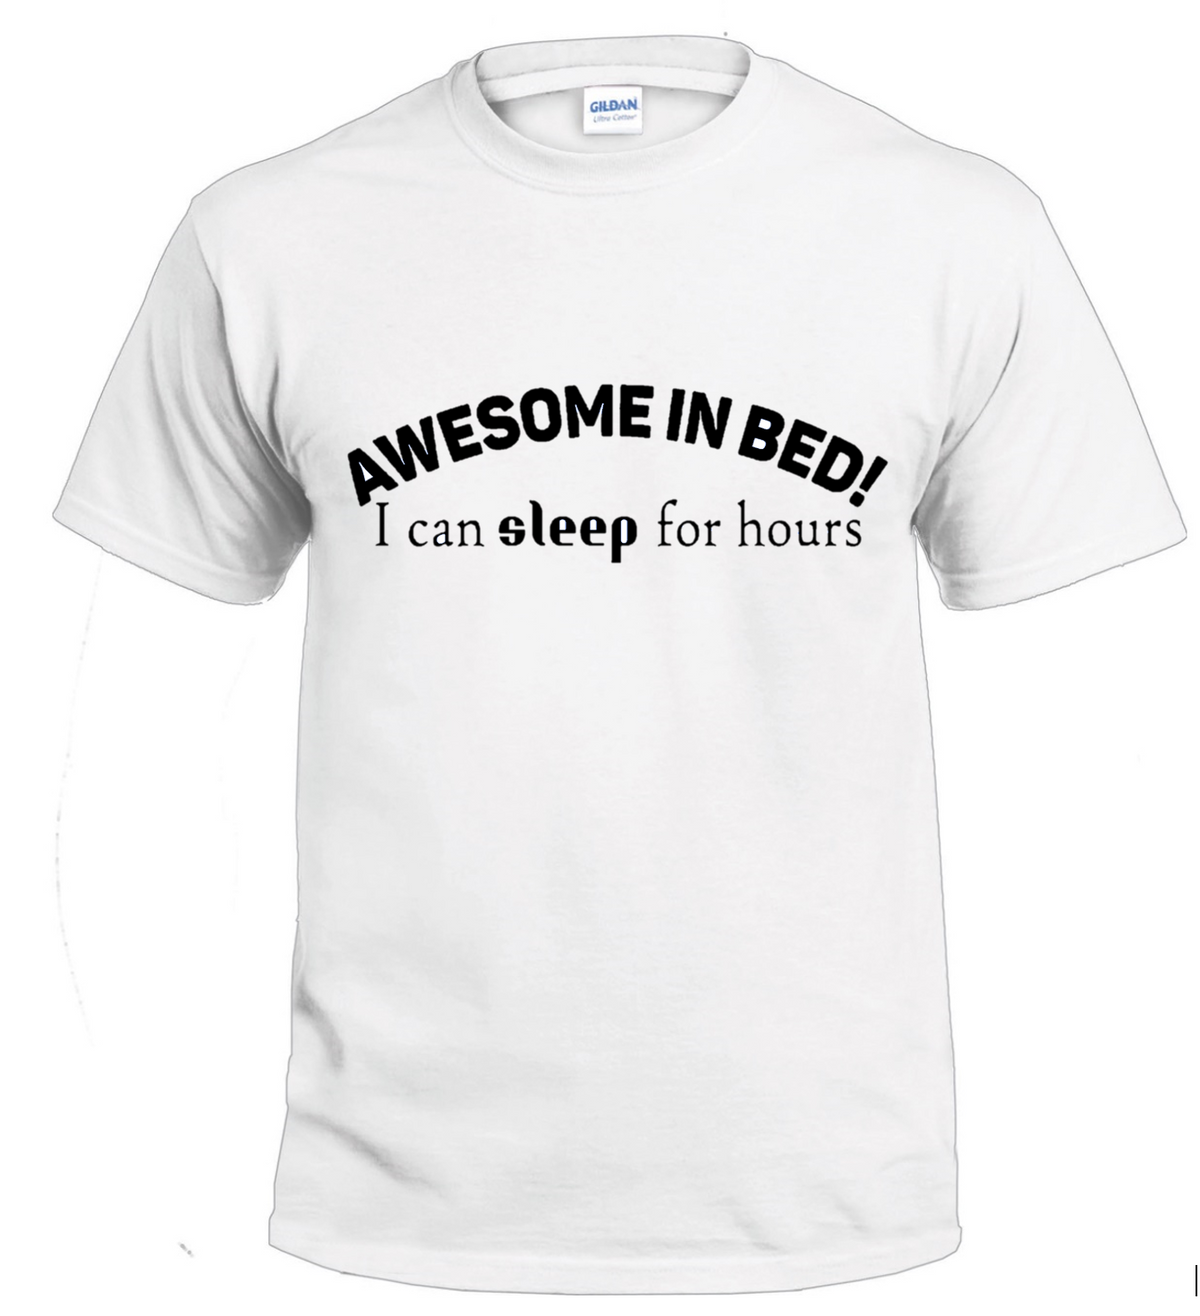 Awesome In Bed - Sassy t-shirt